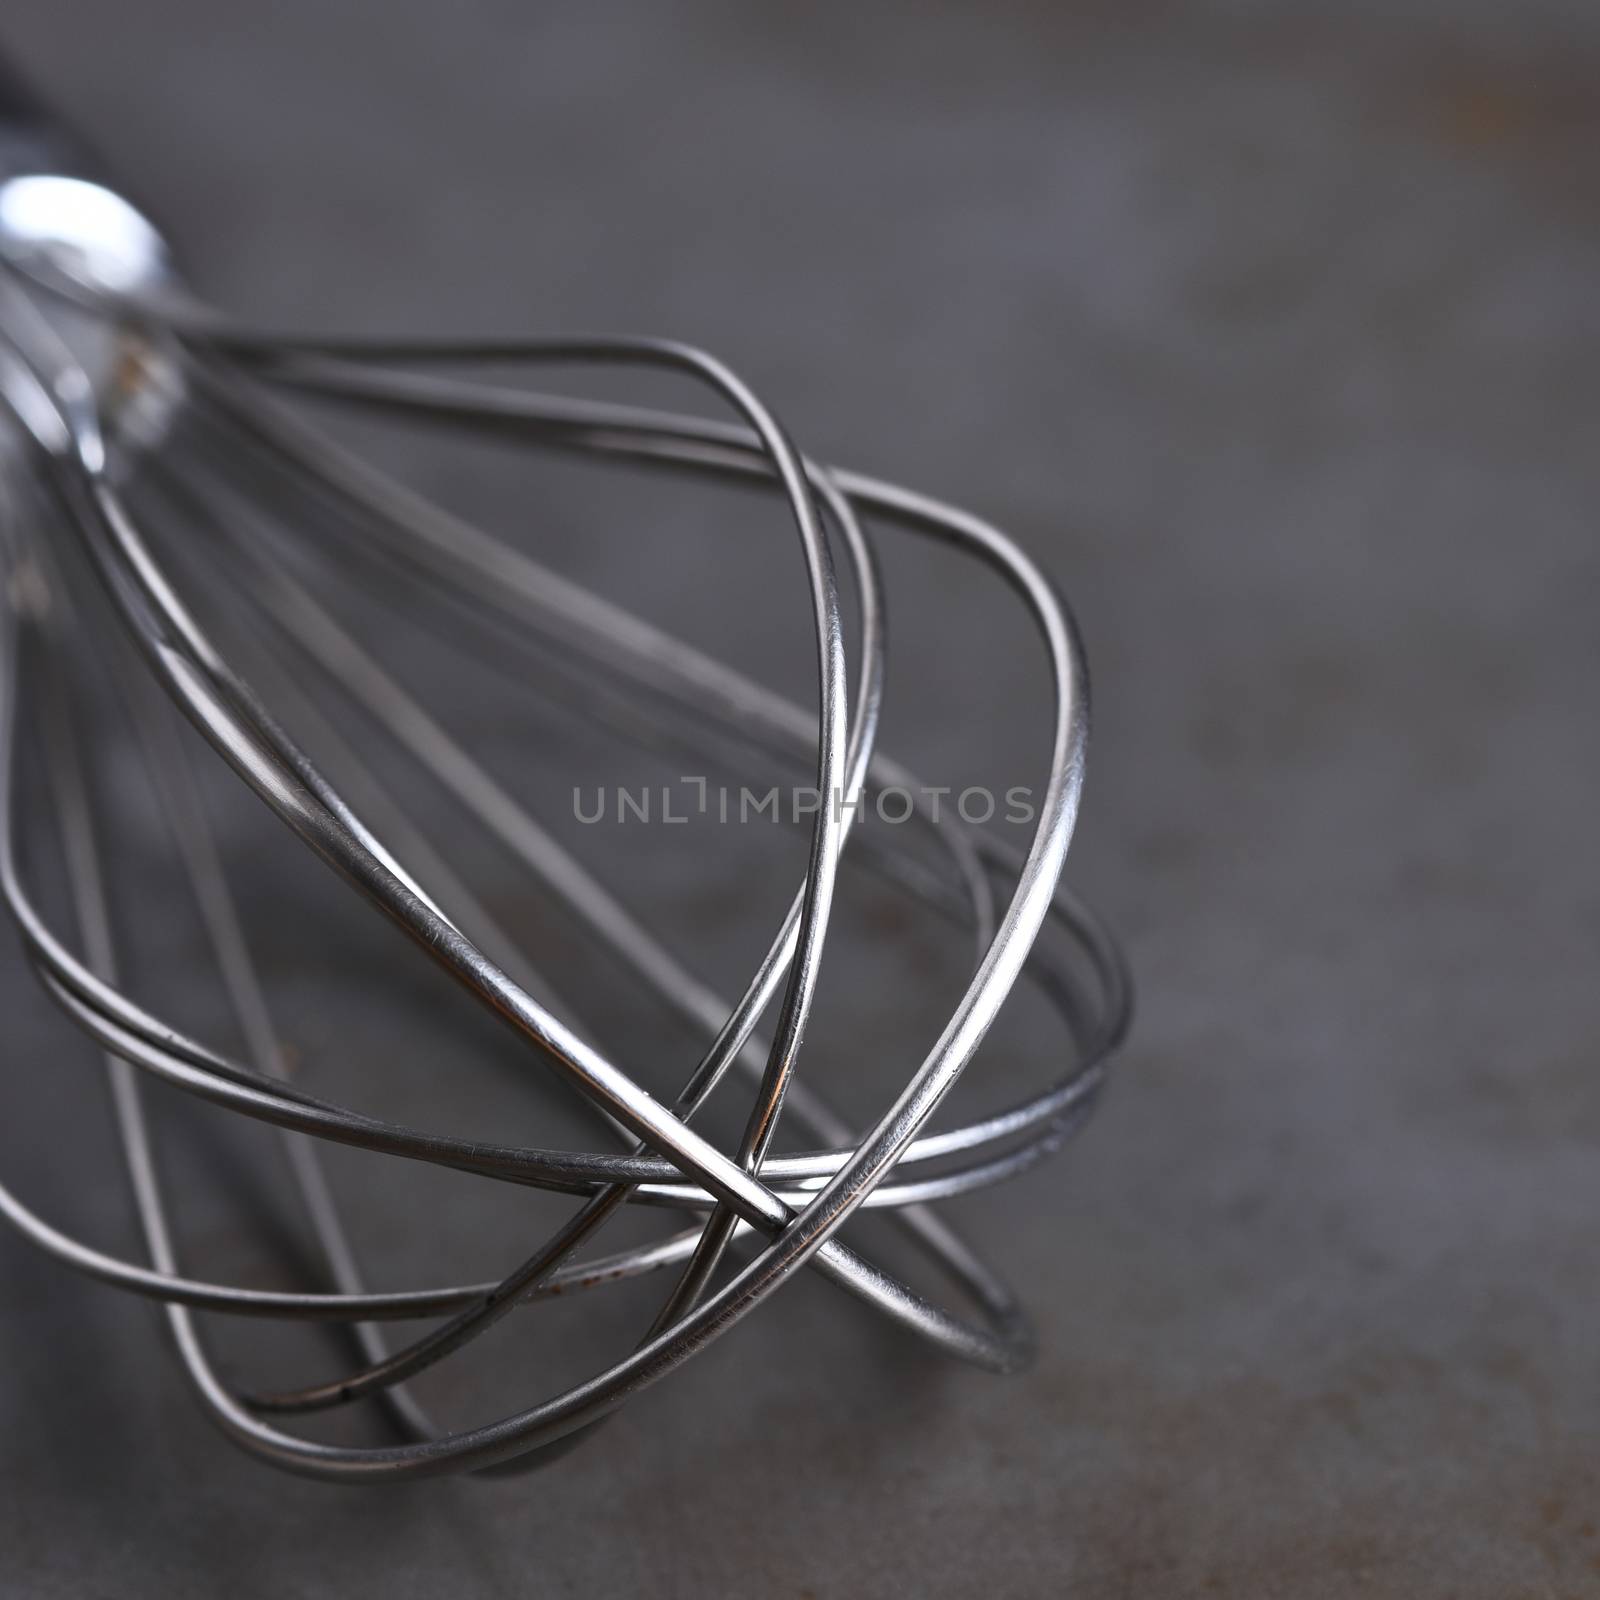 Closeup of a kitchen whisk on a metal surface, with shallow depth of field.